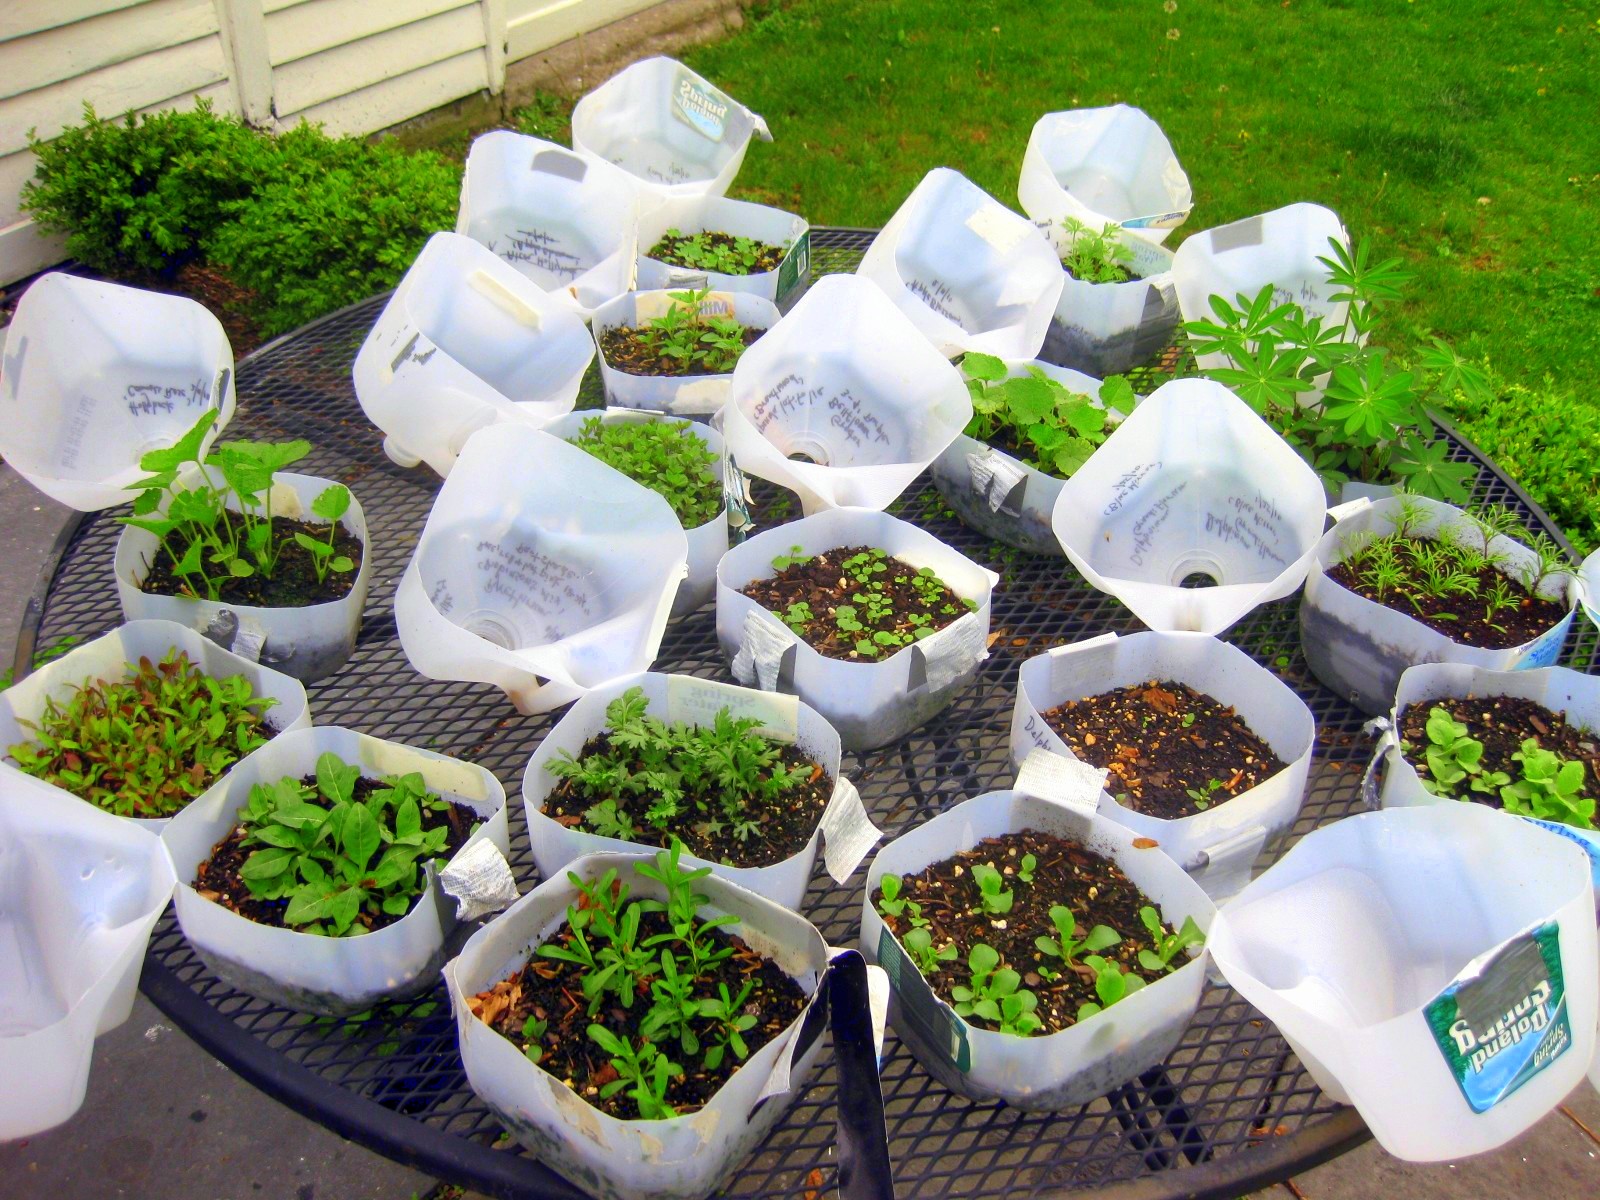 Winter-Sowing: How Many Seeds Per Container?